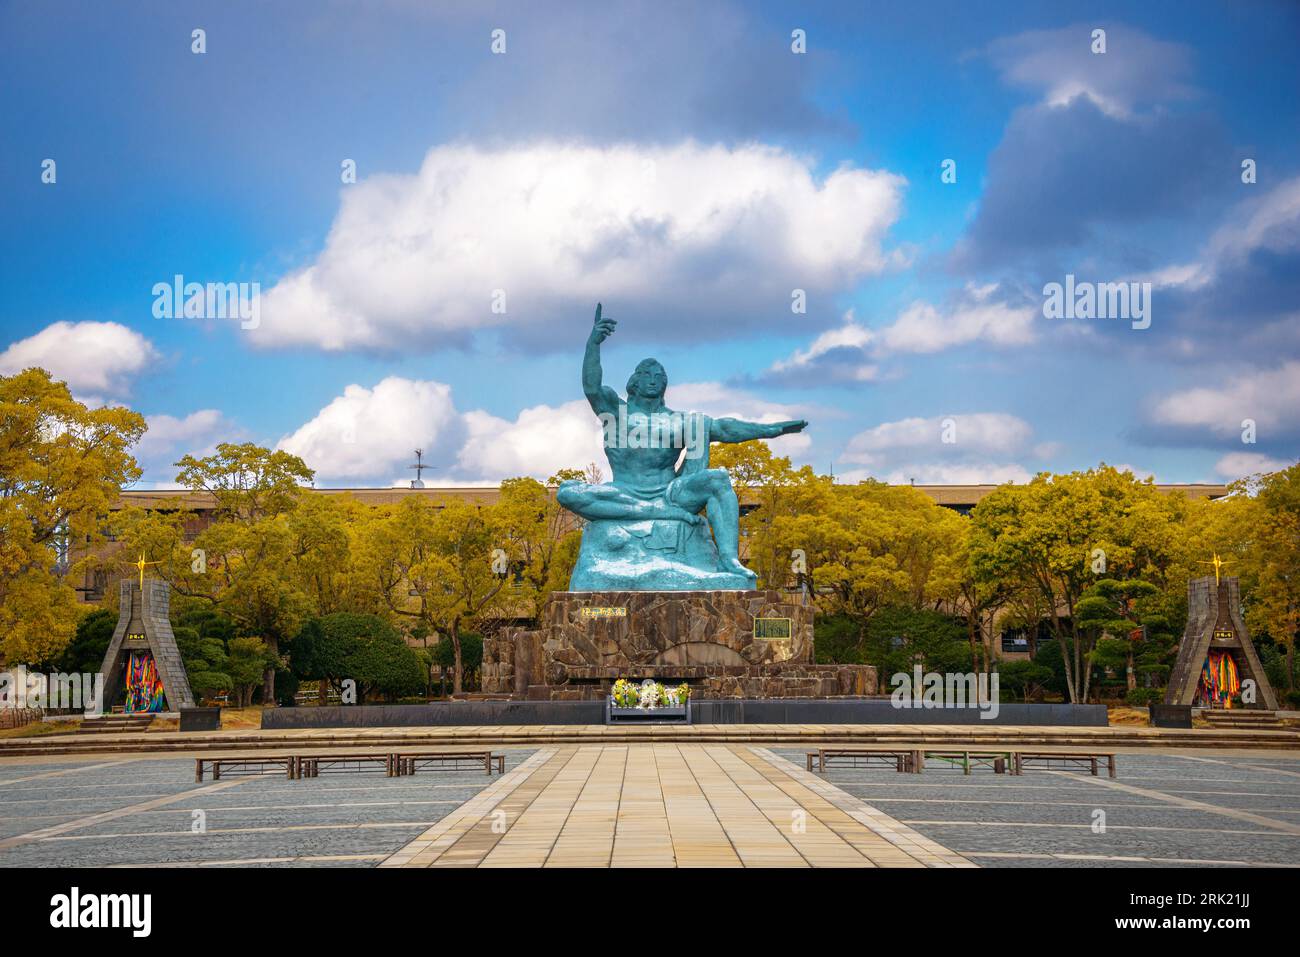 DECEMBER 9, 2012 - NAGASAKI: Nagasaki Peace Park. The 10 meter tall Peace Statue is located near the hypocenter of the August 9, 1945 atomic bombing d Stock Photo